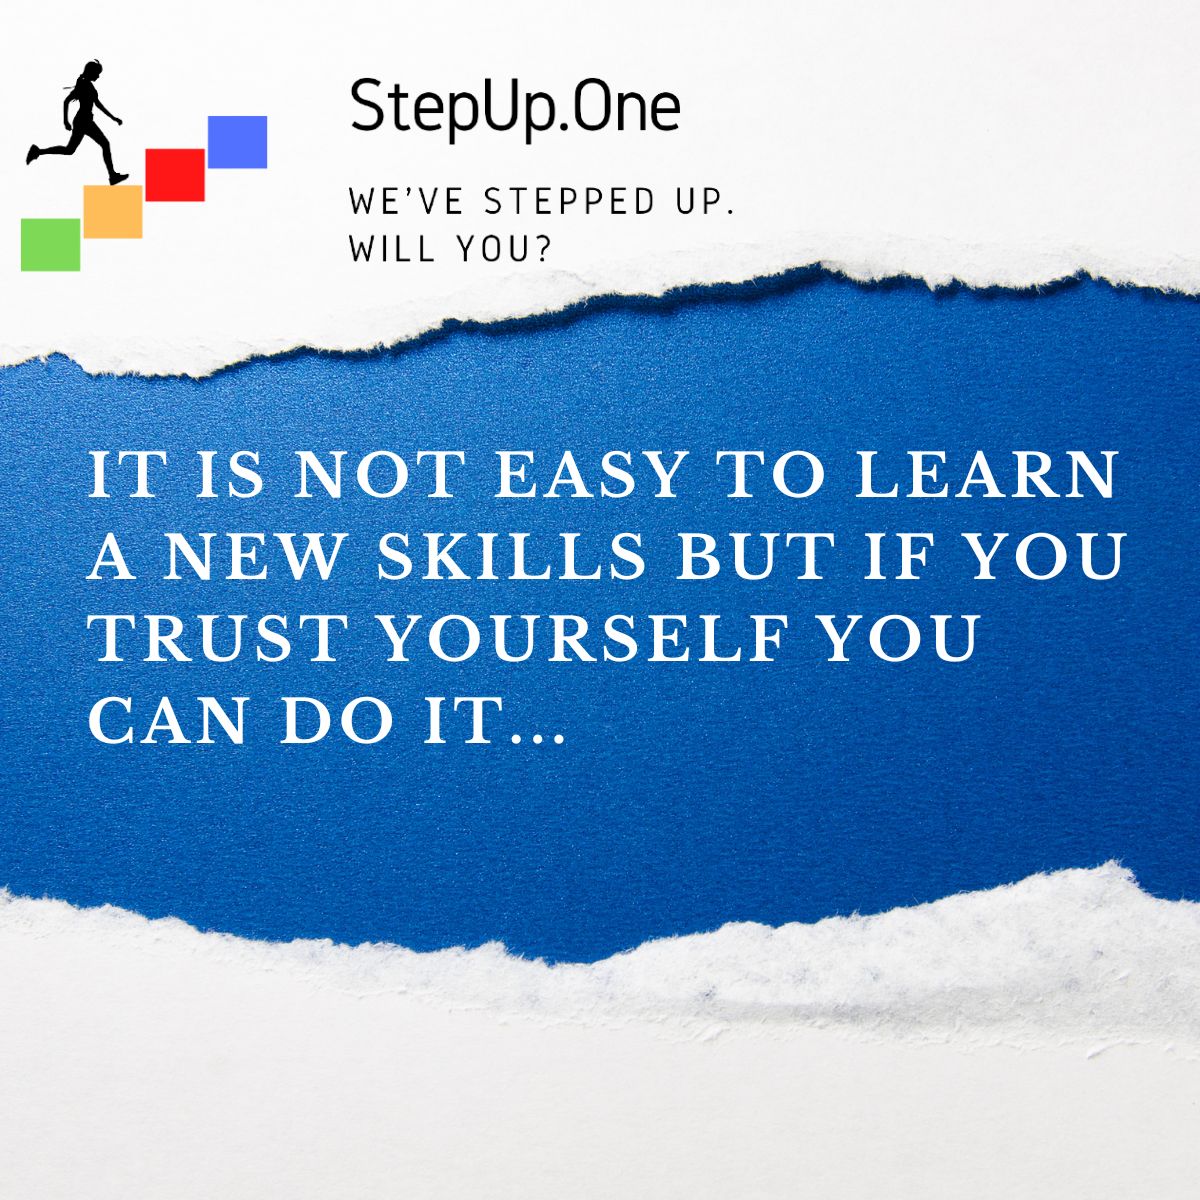 In @Stepupone, it is not only learning a new skills, it is also earning. #ReskillRefugees #Stepupone #Digital